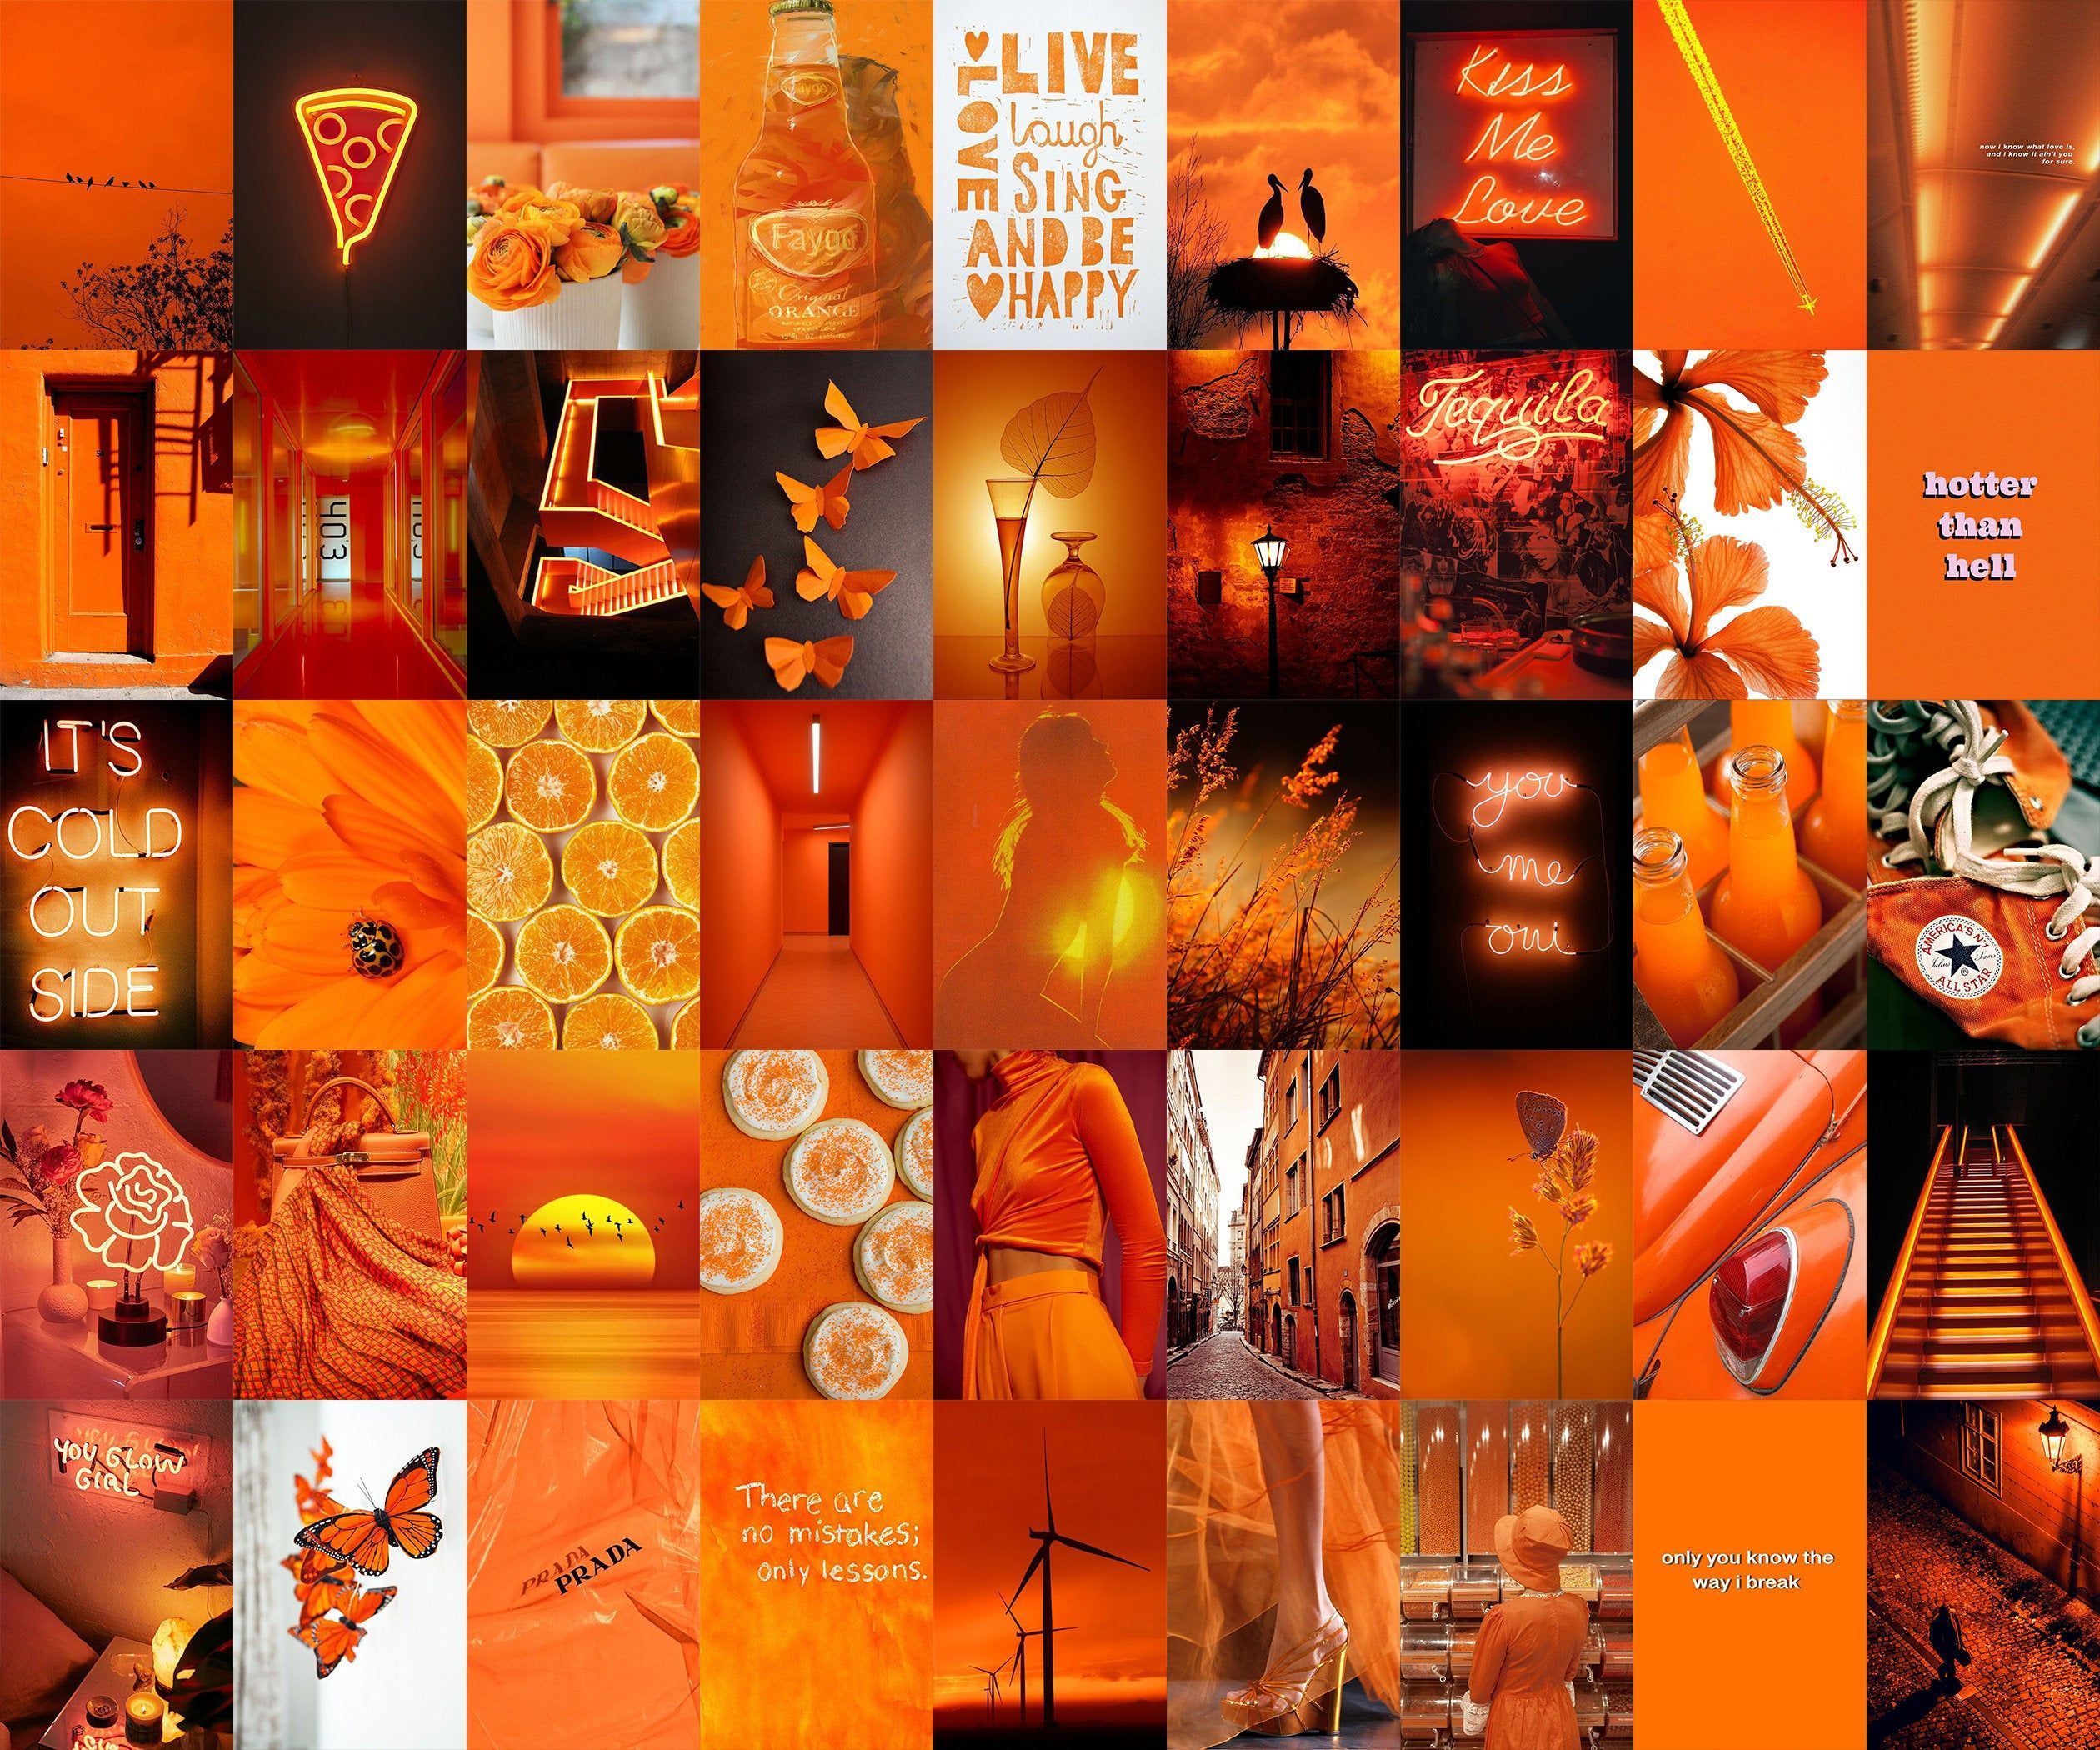 Neon Orange Aesthetic Wall Collage Kit Ready To print Pack. Etsy. Orange aesthetic, Orange wallpaper, Wall collage